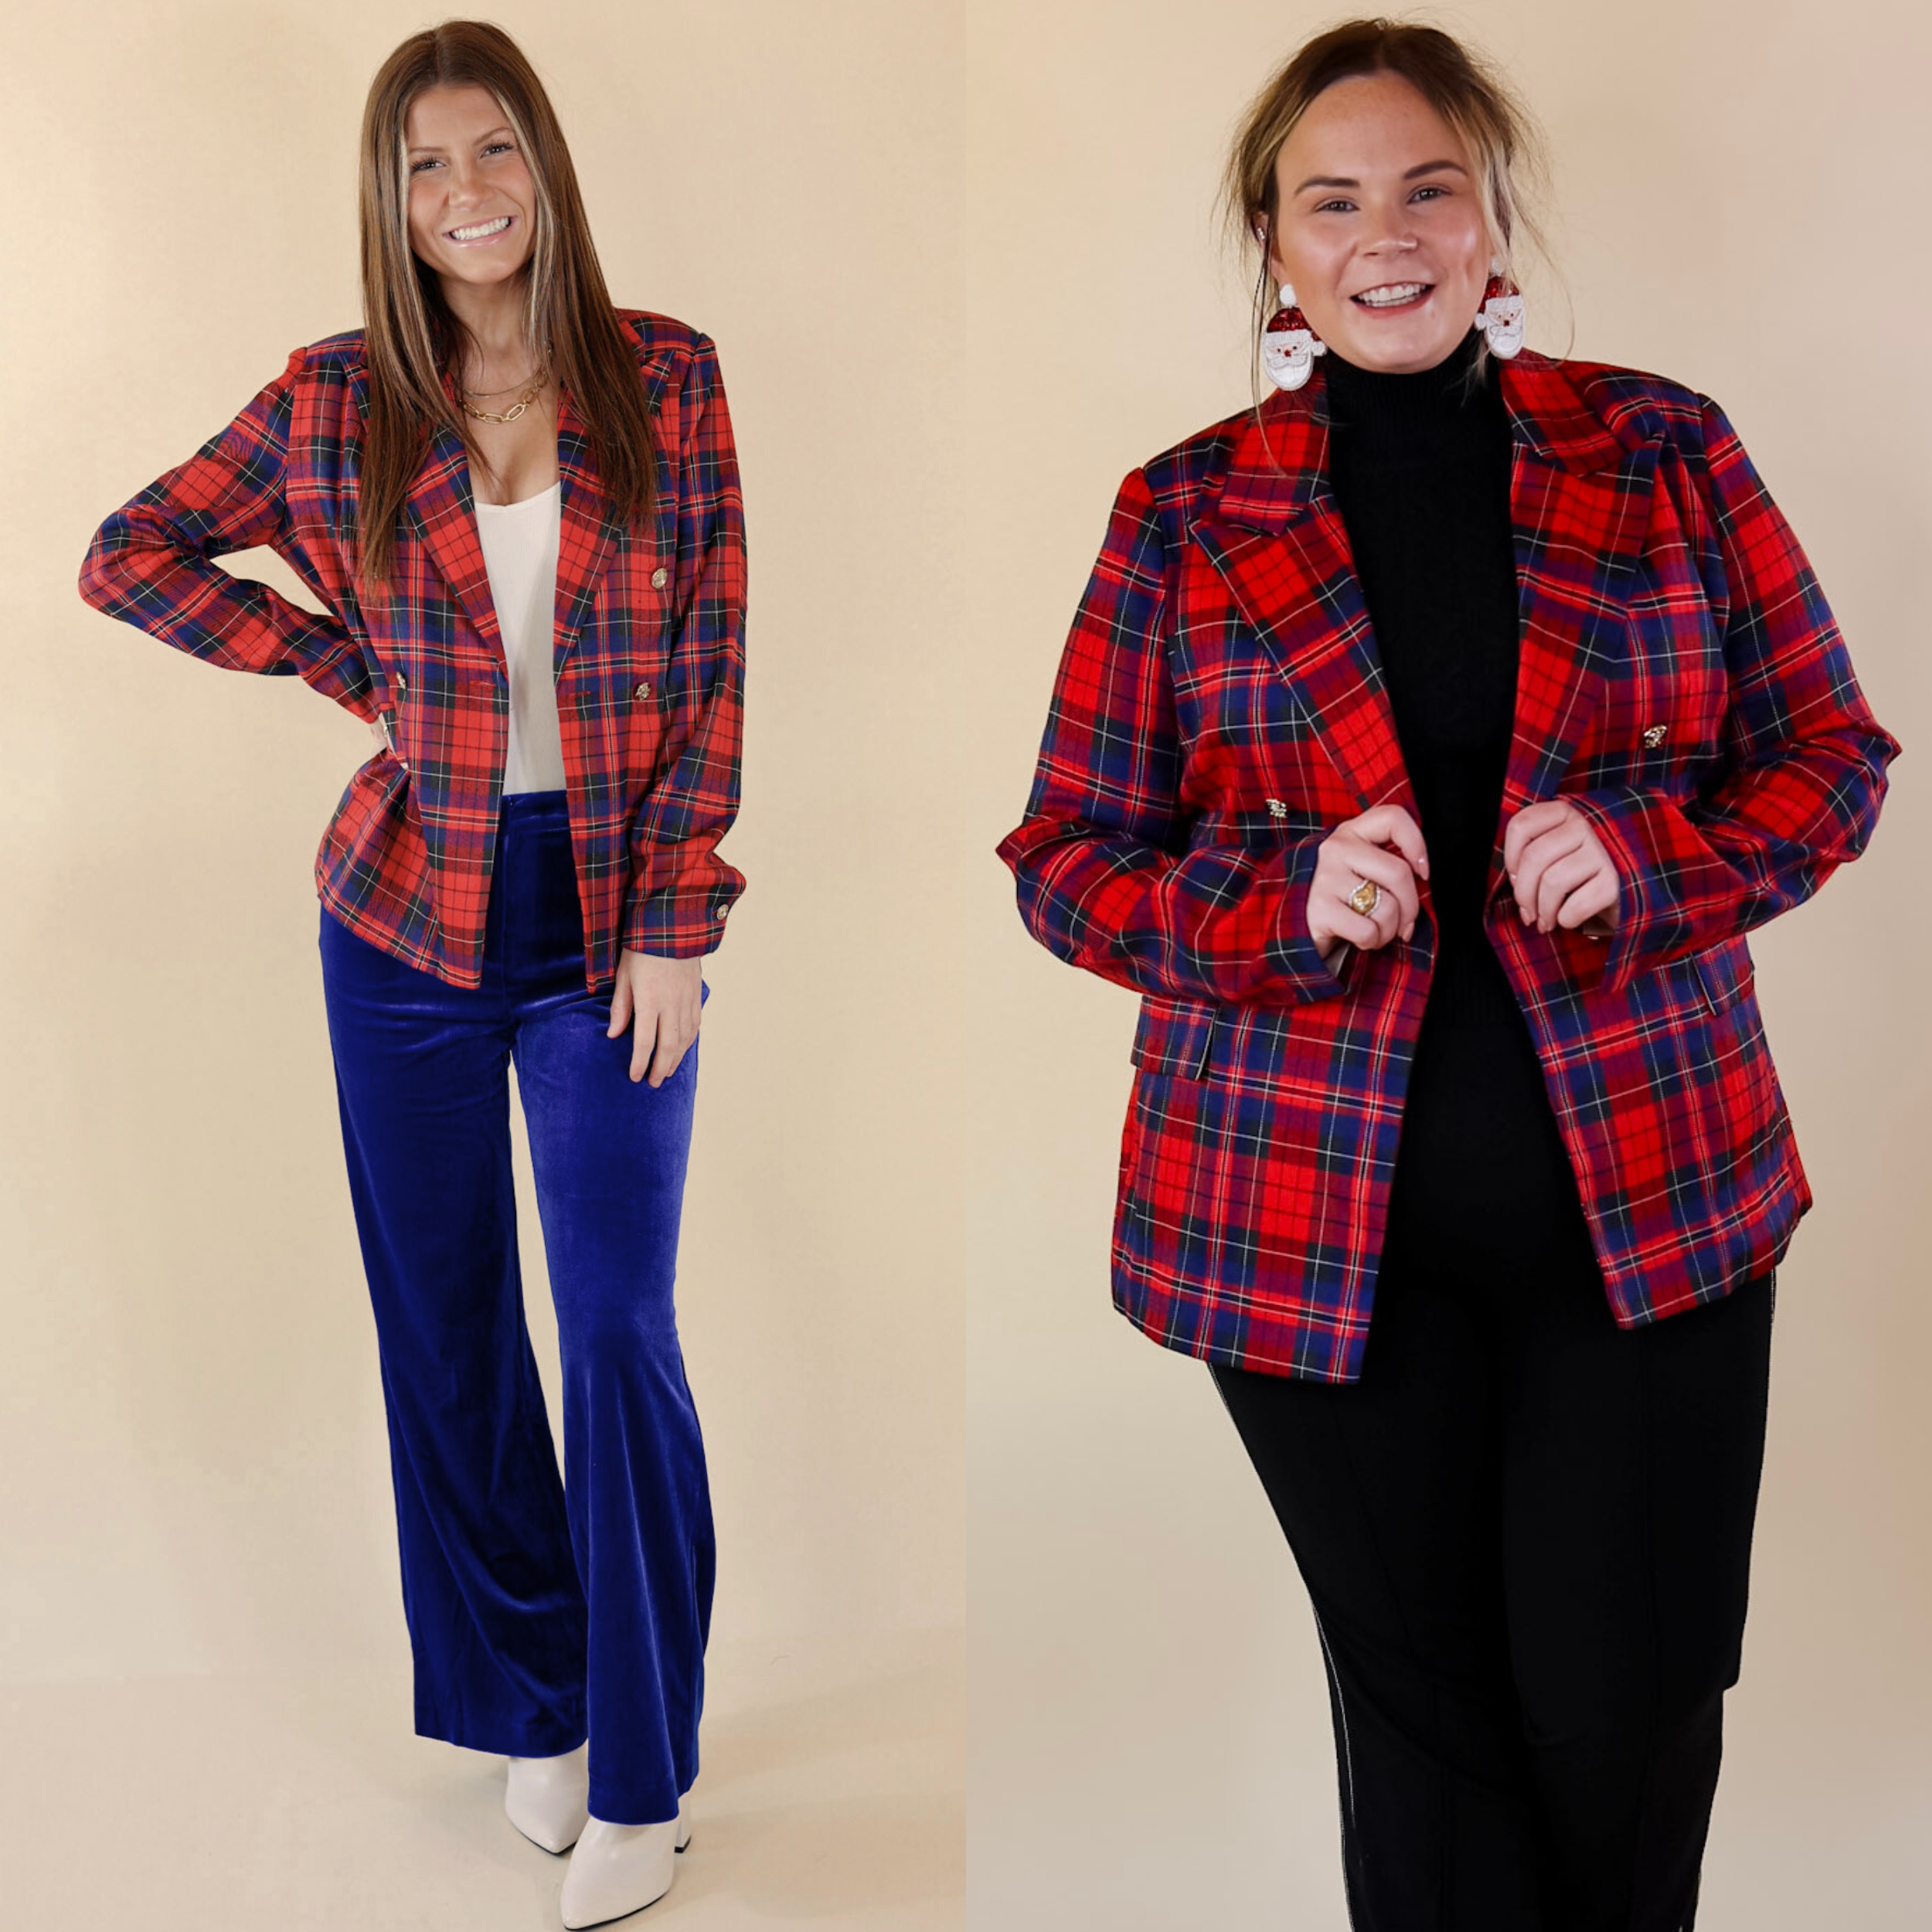 Model is wearing a red and blue plaid blazer with gold buttons. Model has this blazer paired with blue velvet pants, white booties, and gold jewelry